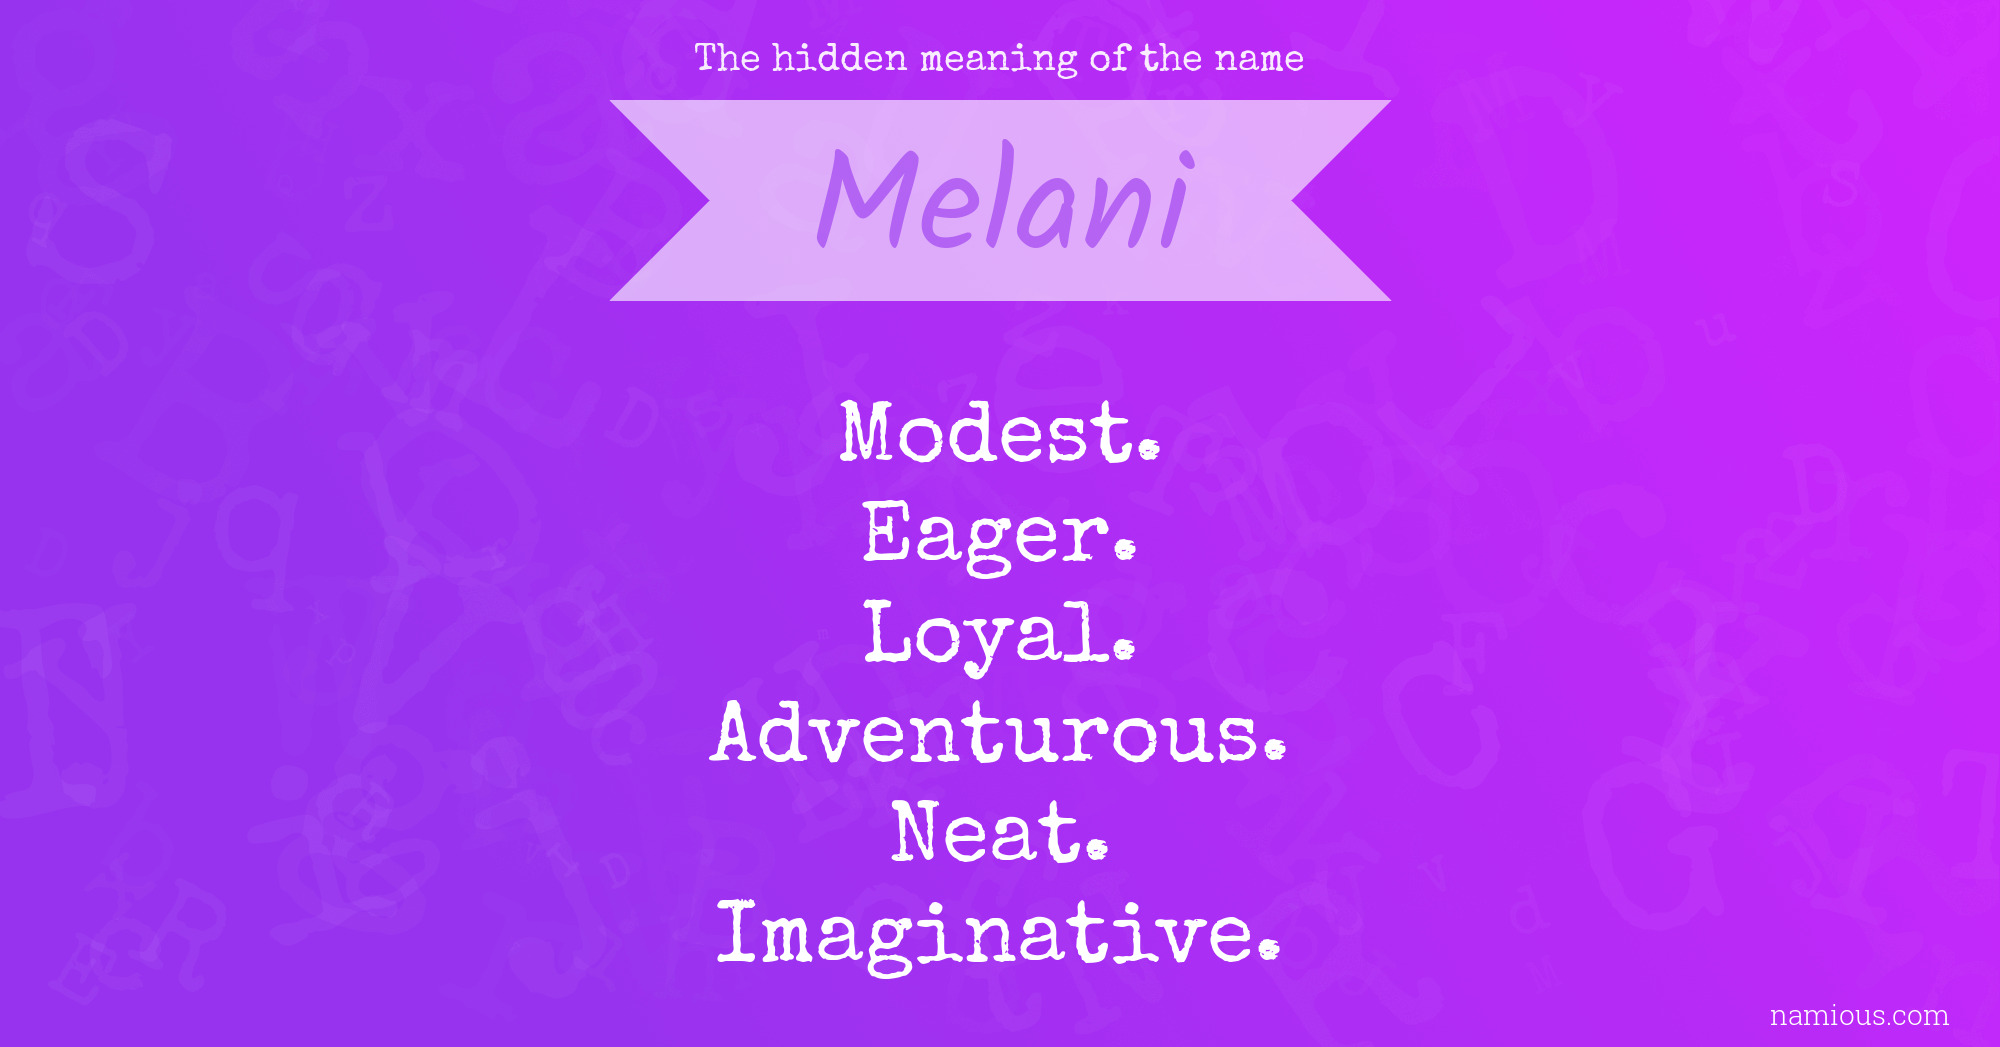 The hidden meaning of the name Melani